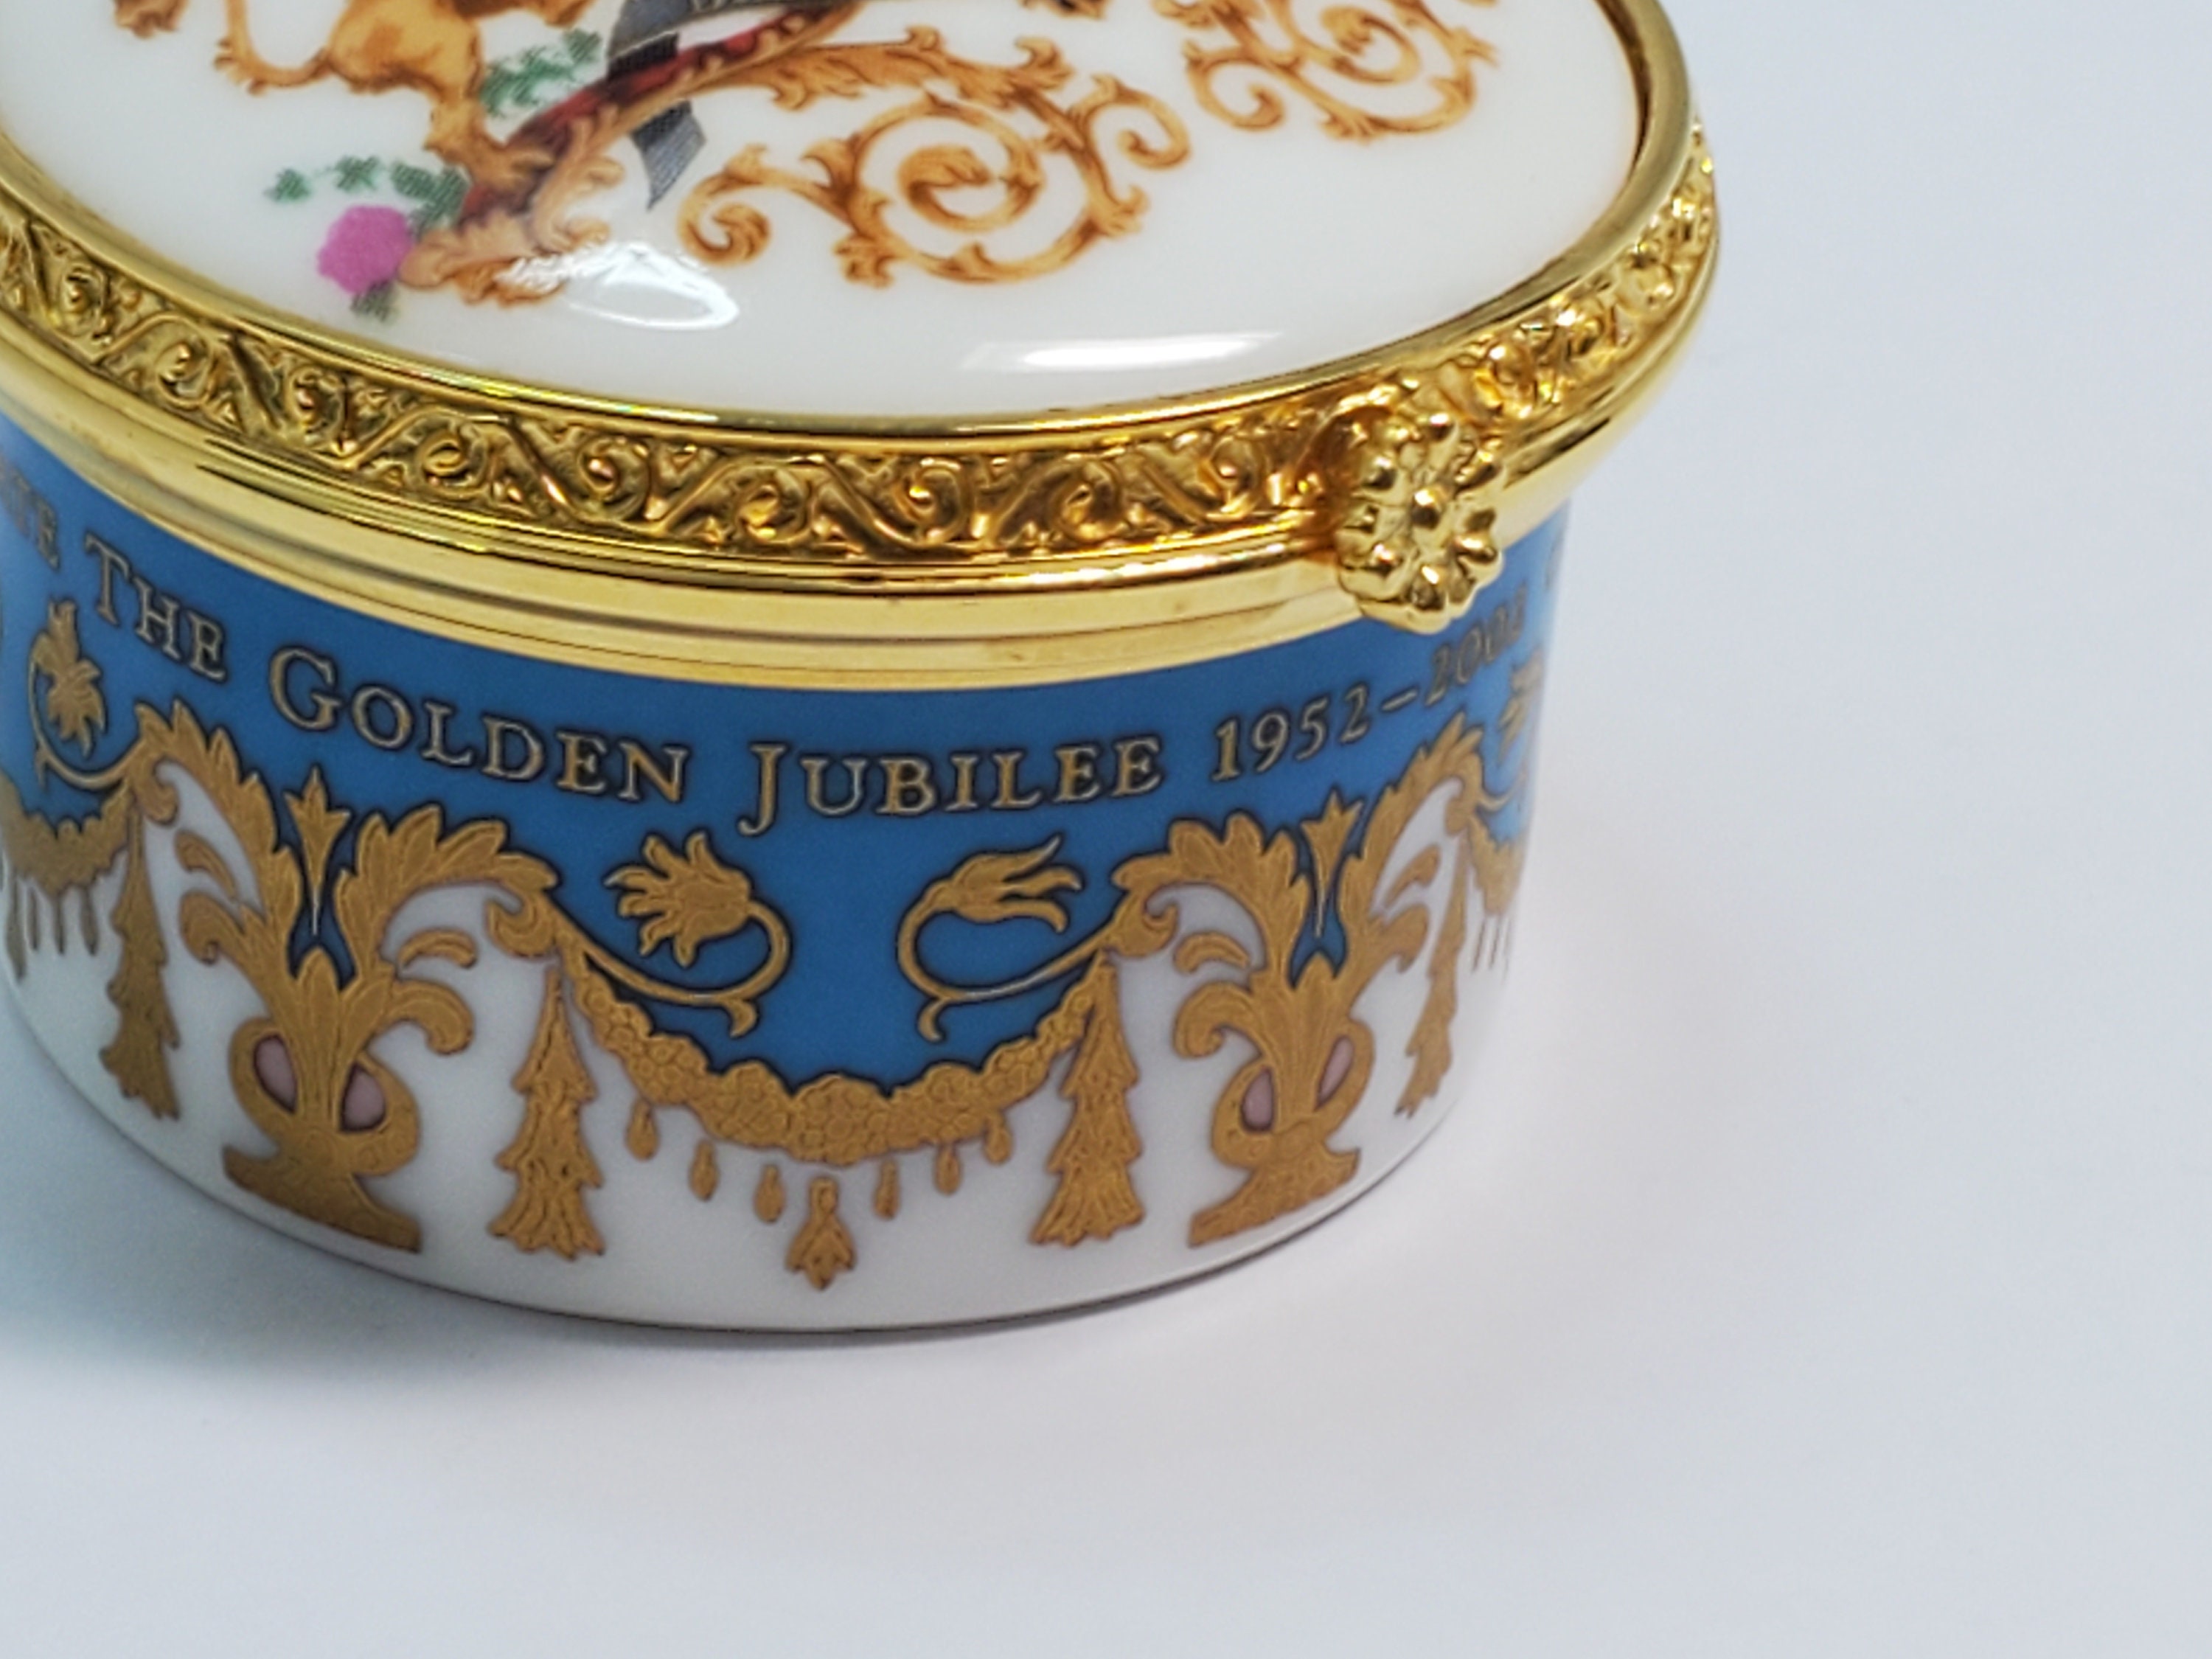 The Royal Collection Golden Jubilee Trinket Box 2002 | Etsy